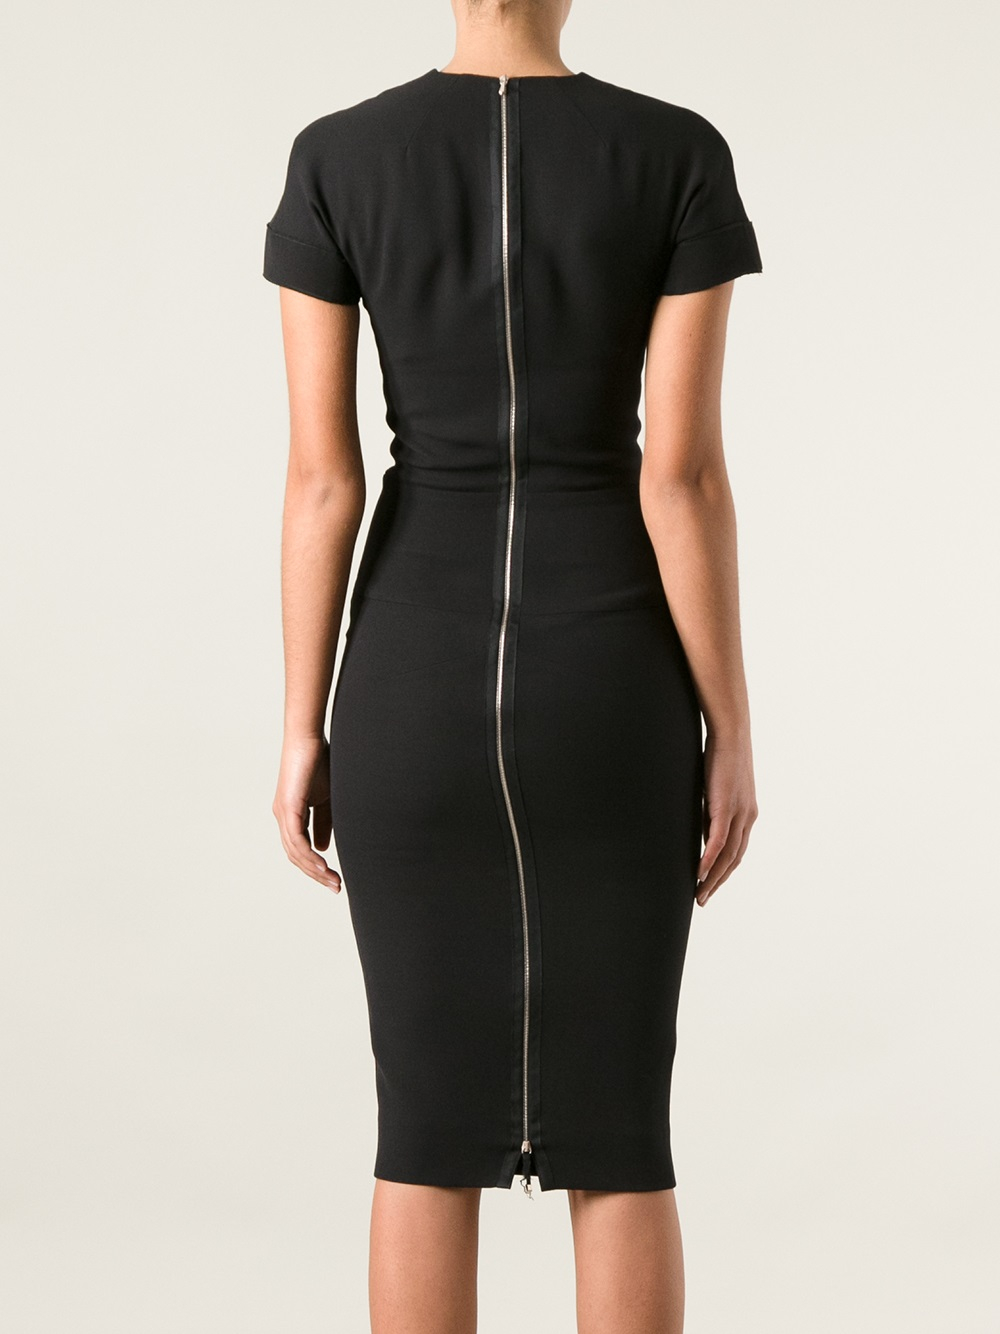 Victoria beckham Fitted Dress in Black | Lyst